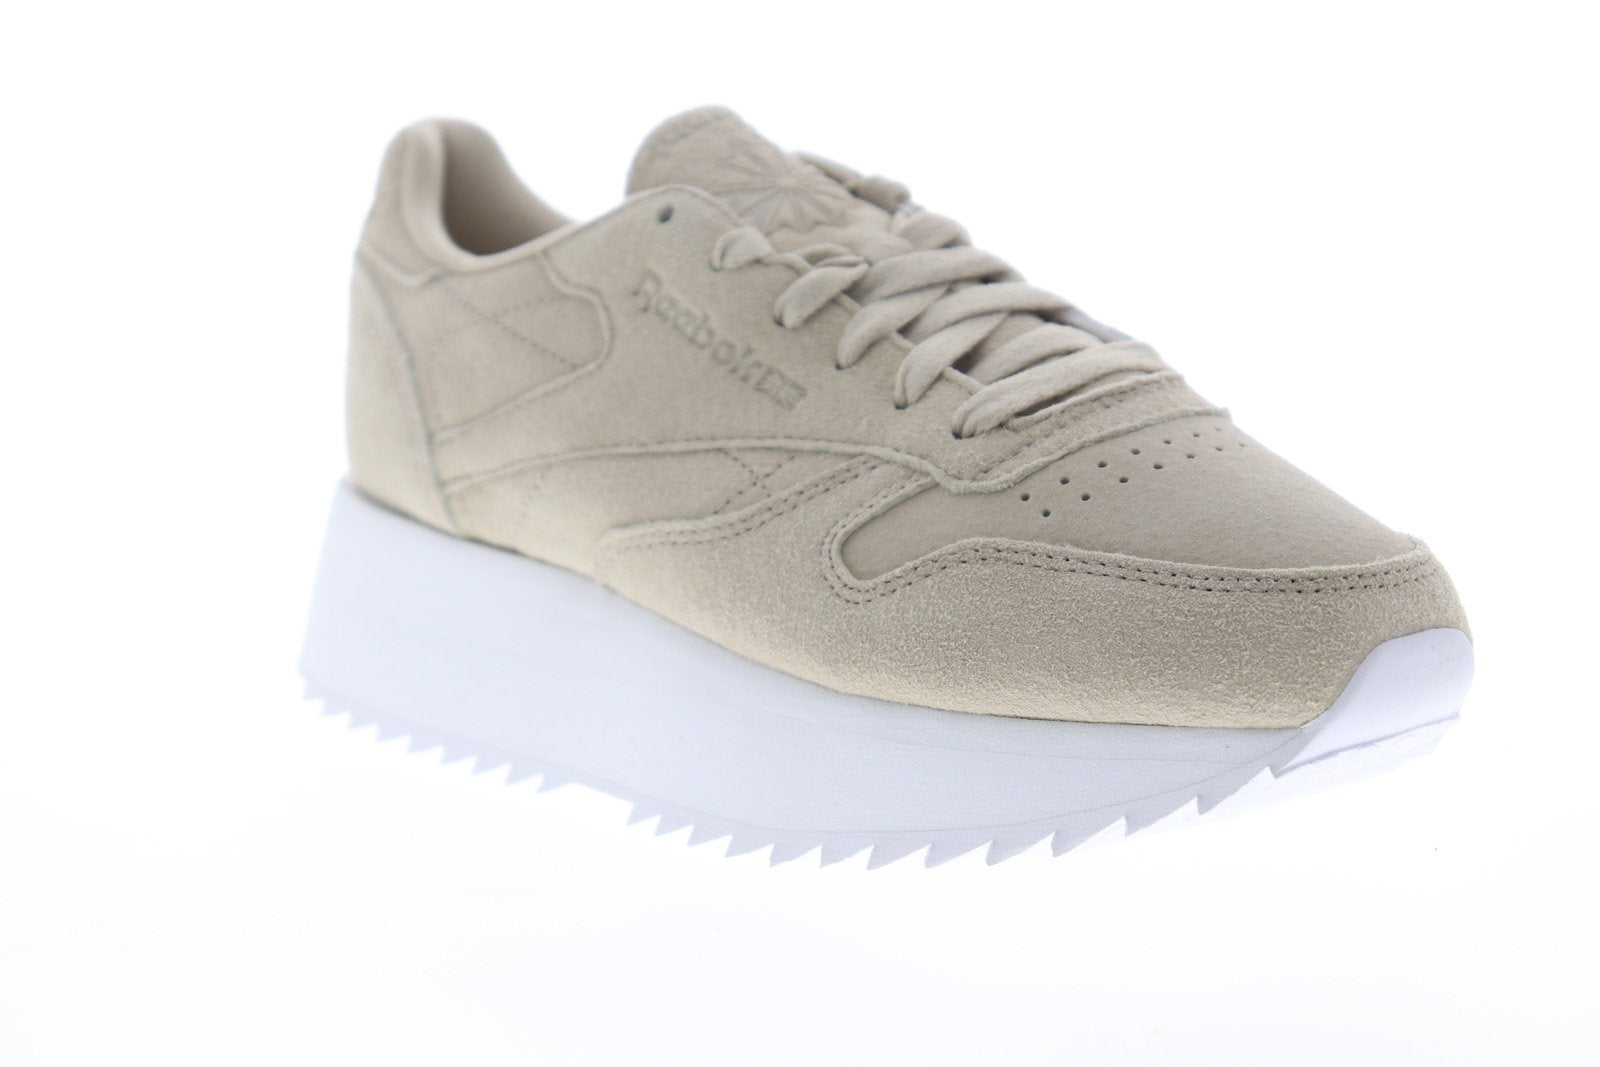 Frø Perseus Foresee Reebok Classic Leather Double DV3629 Womens Gray Suede Lifestyle Sneak -  Ruze Shoes